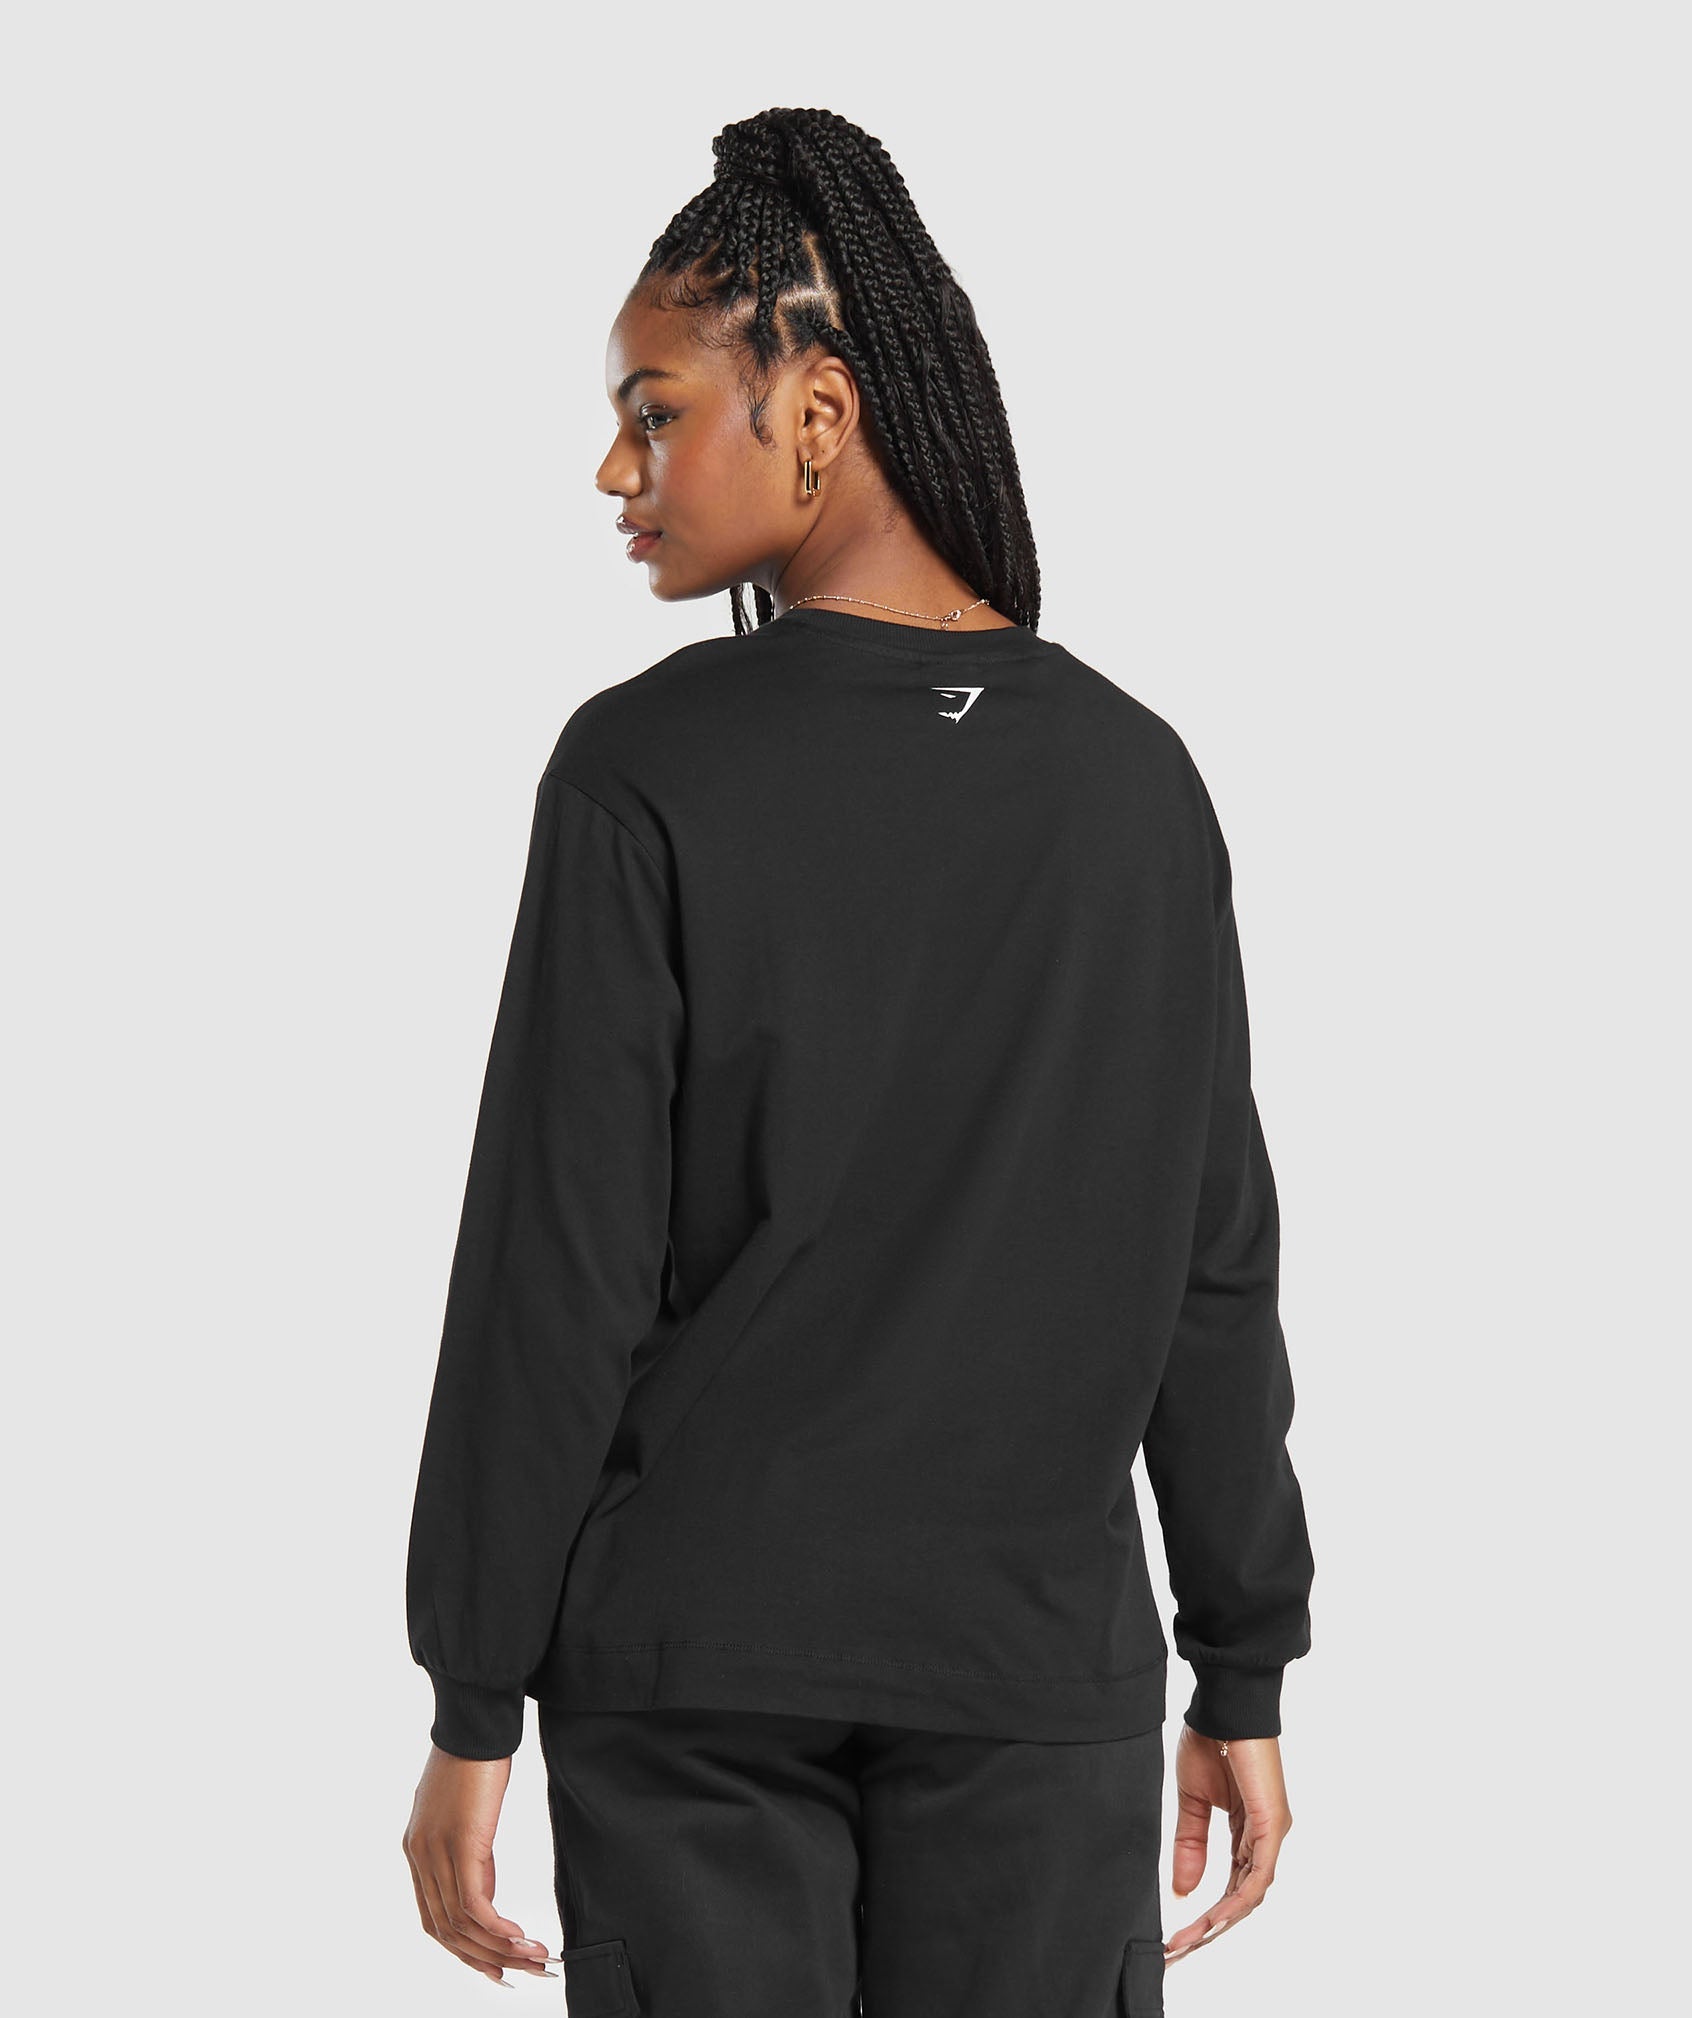 Its Giving Gym Long Sleeve Top